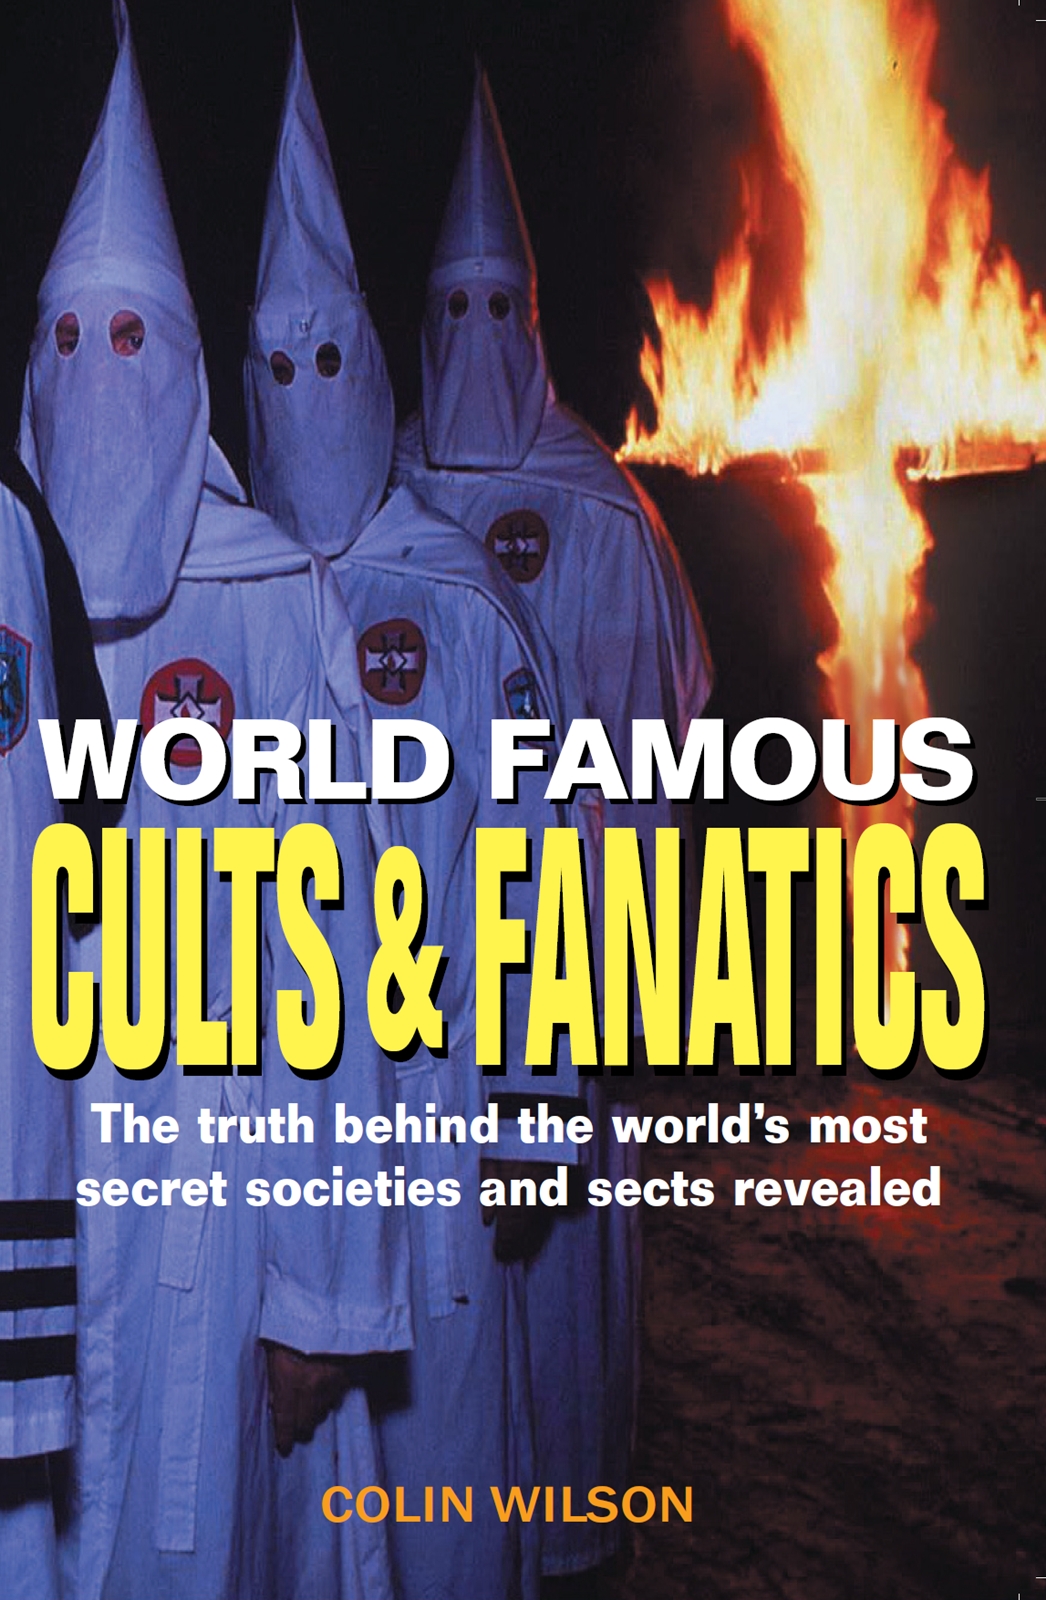 World Famous Cults and Fanatics by Colin Wilson